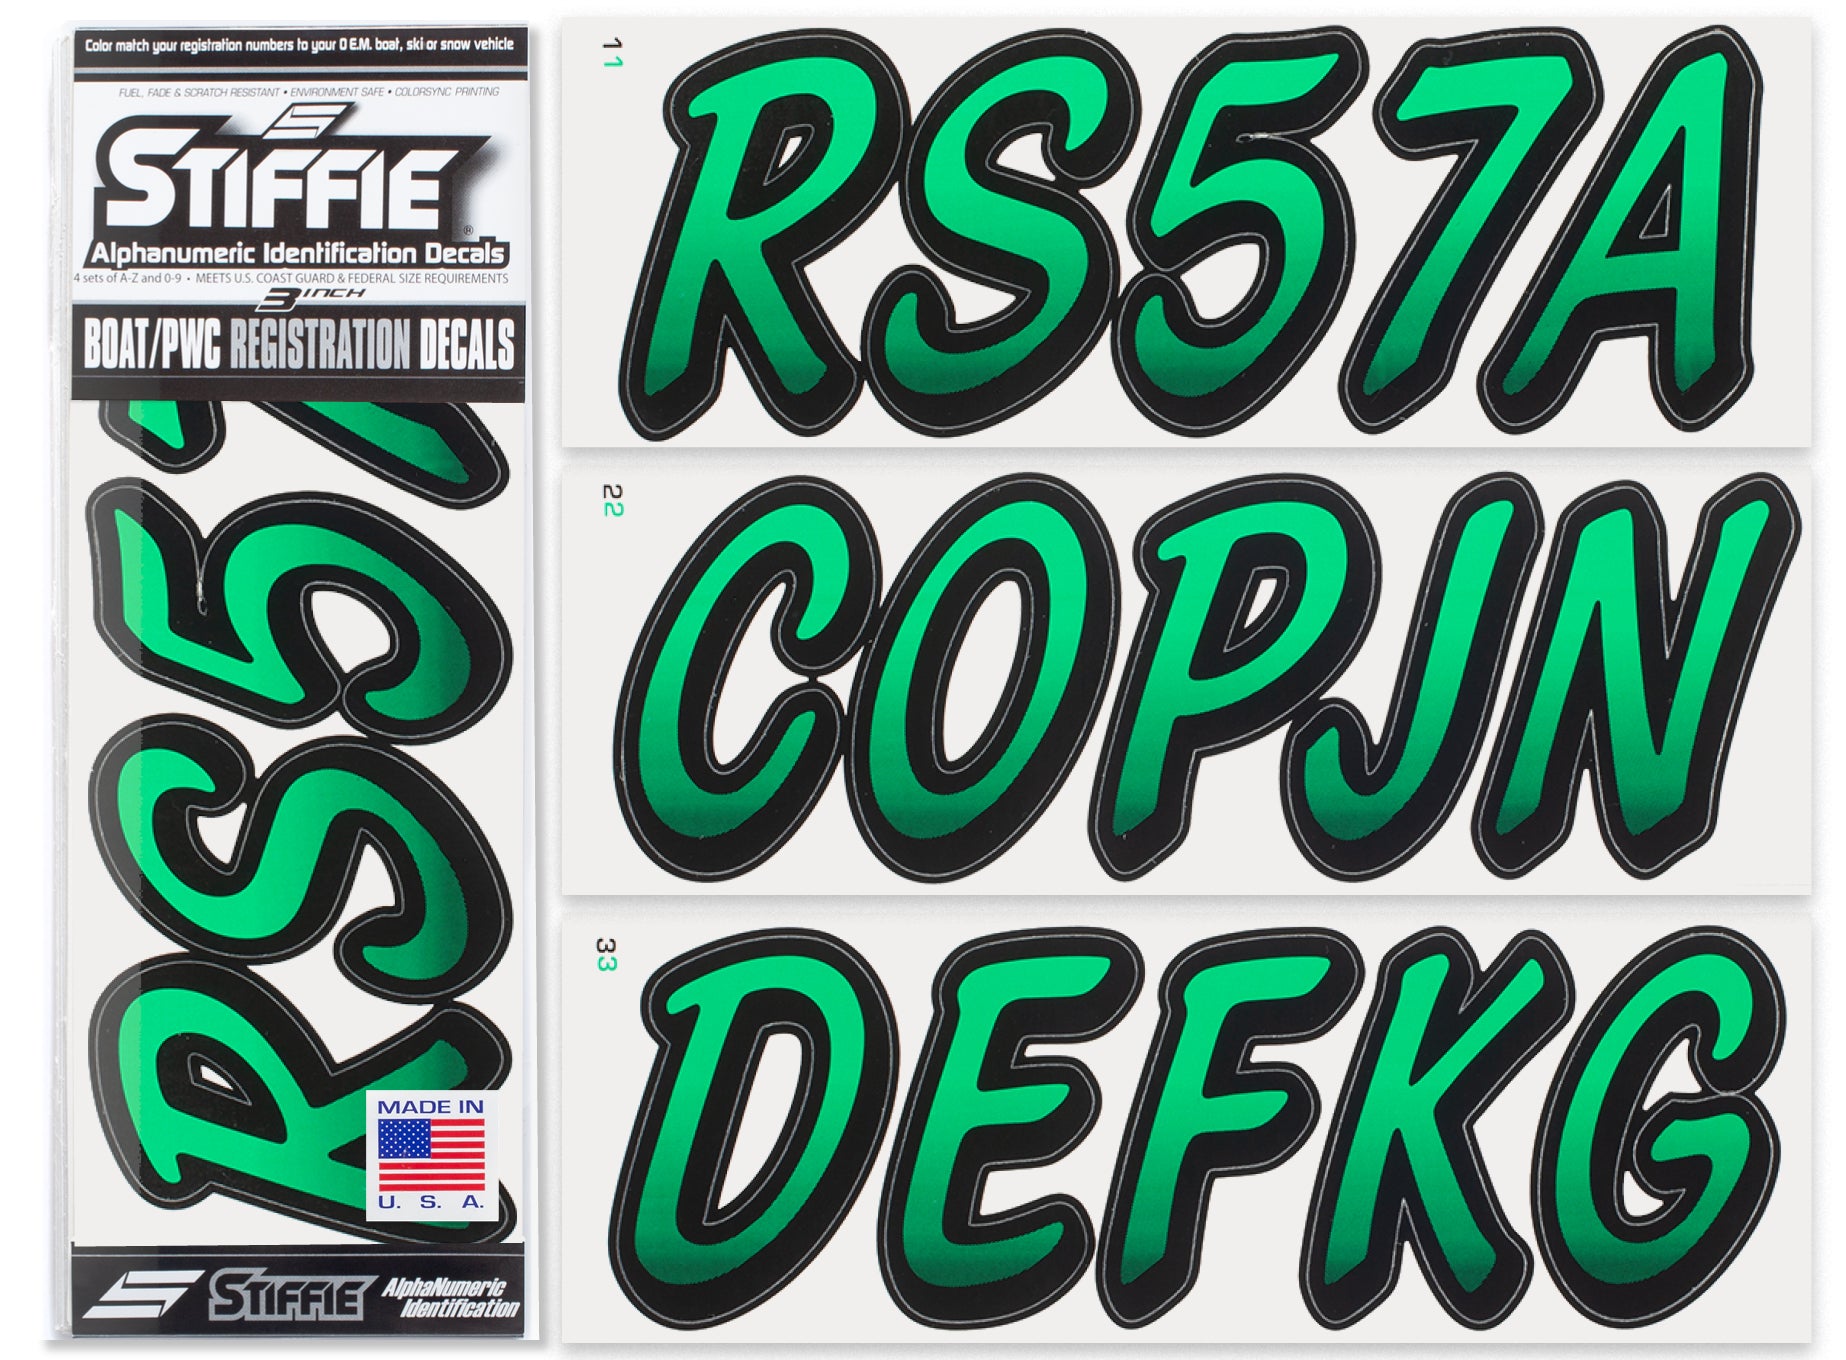 STIFFIE Whipline Seafoam Green / Black 3" Alpha-Numeric Registration Identification Numbers Stickers Decals for Boats & Personal Watercraft